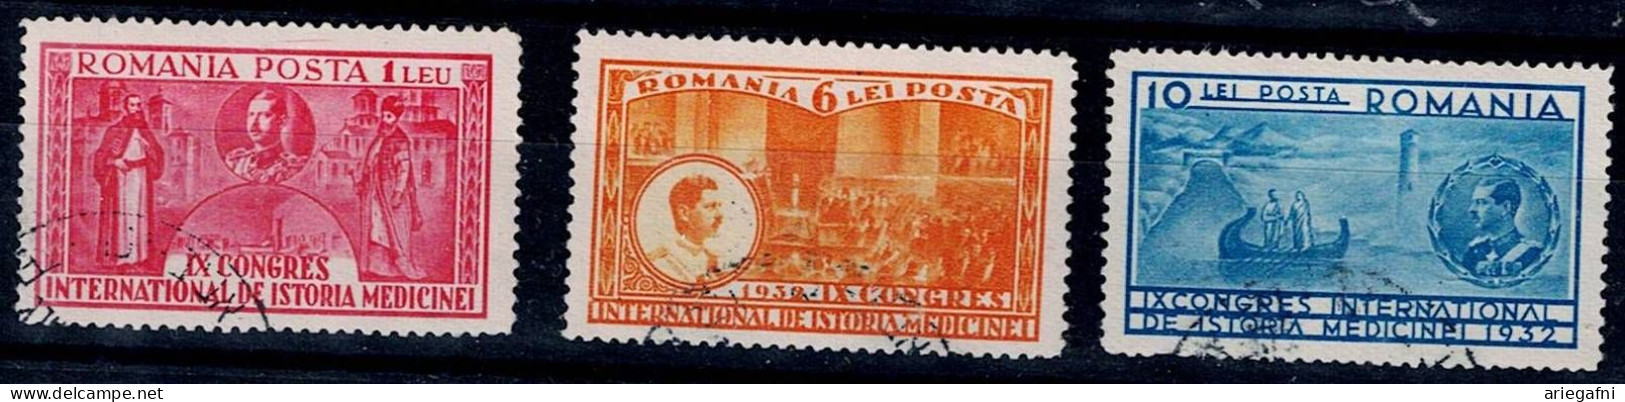 ROMANIA 1932 INTERNATIONAL CONGRESS ON THE HISTORY OF MEDICINE, BUCHAREST MI No 443-5 USED VF!! - Used Stamps